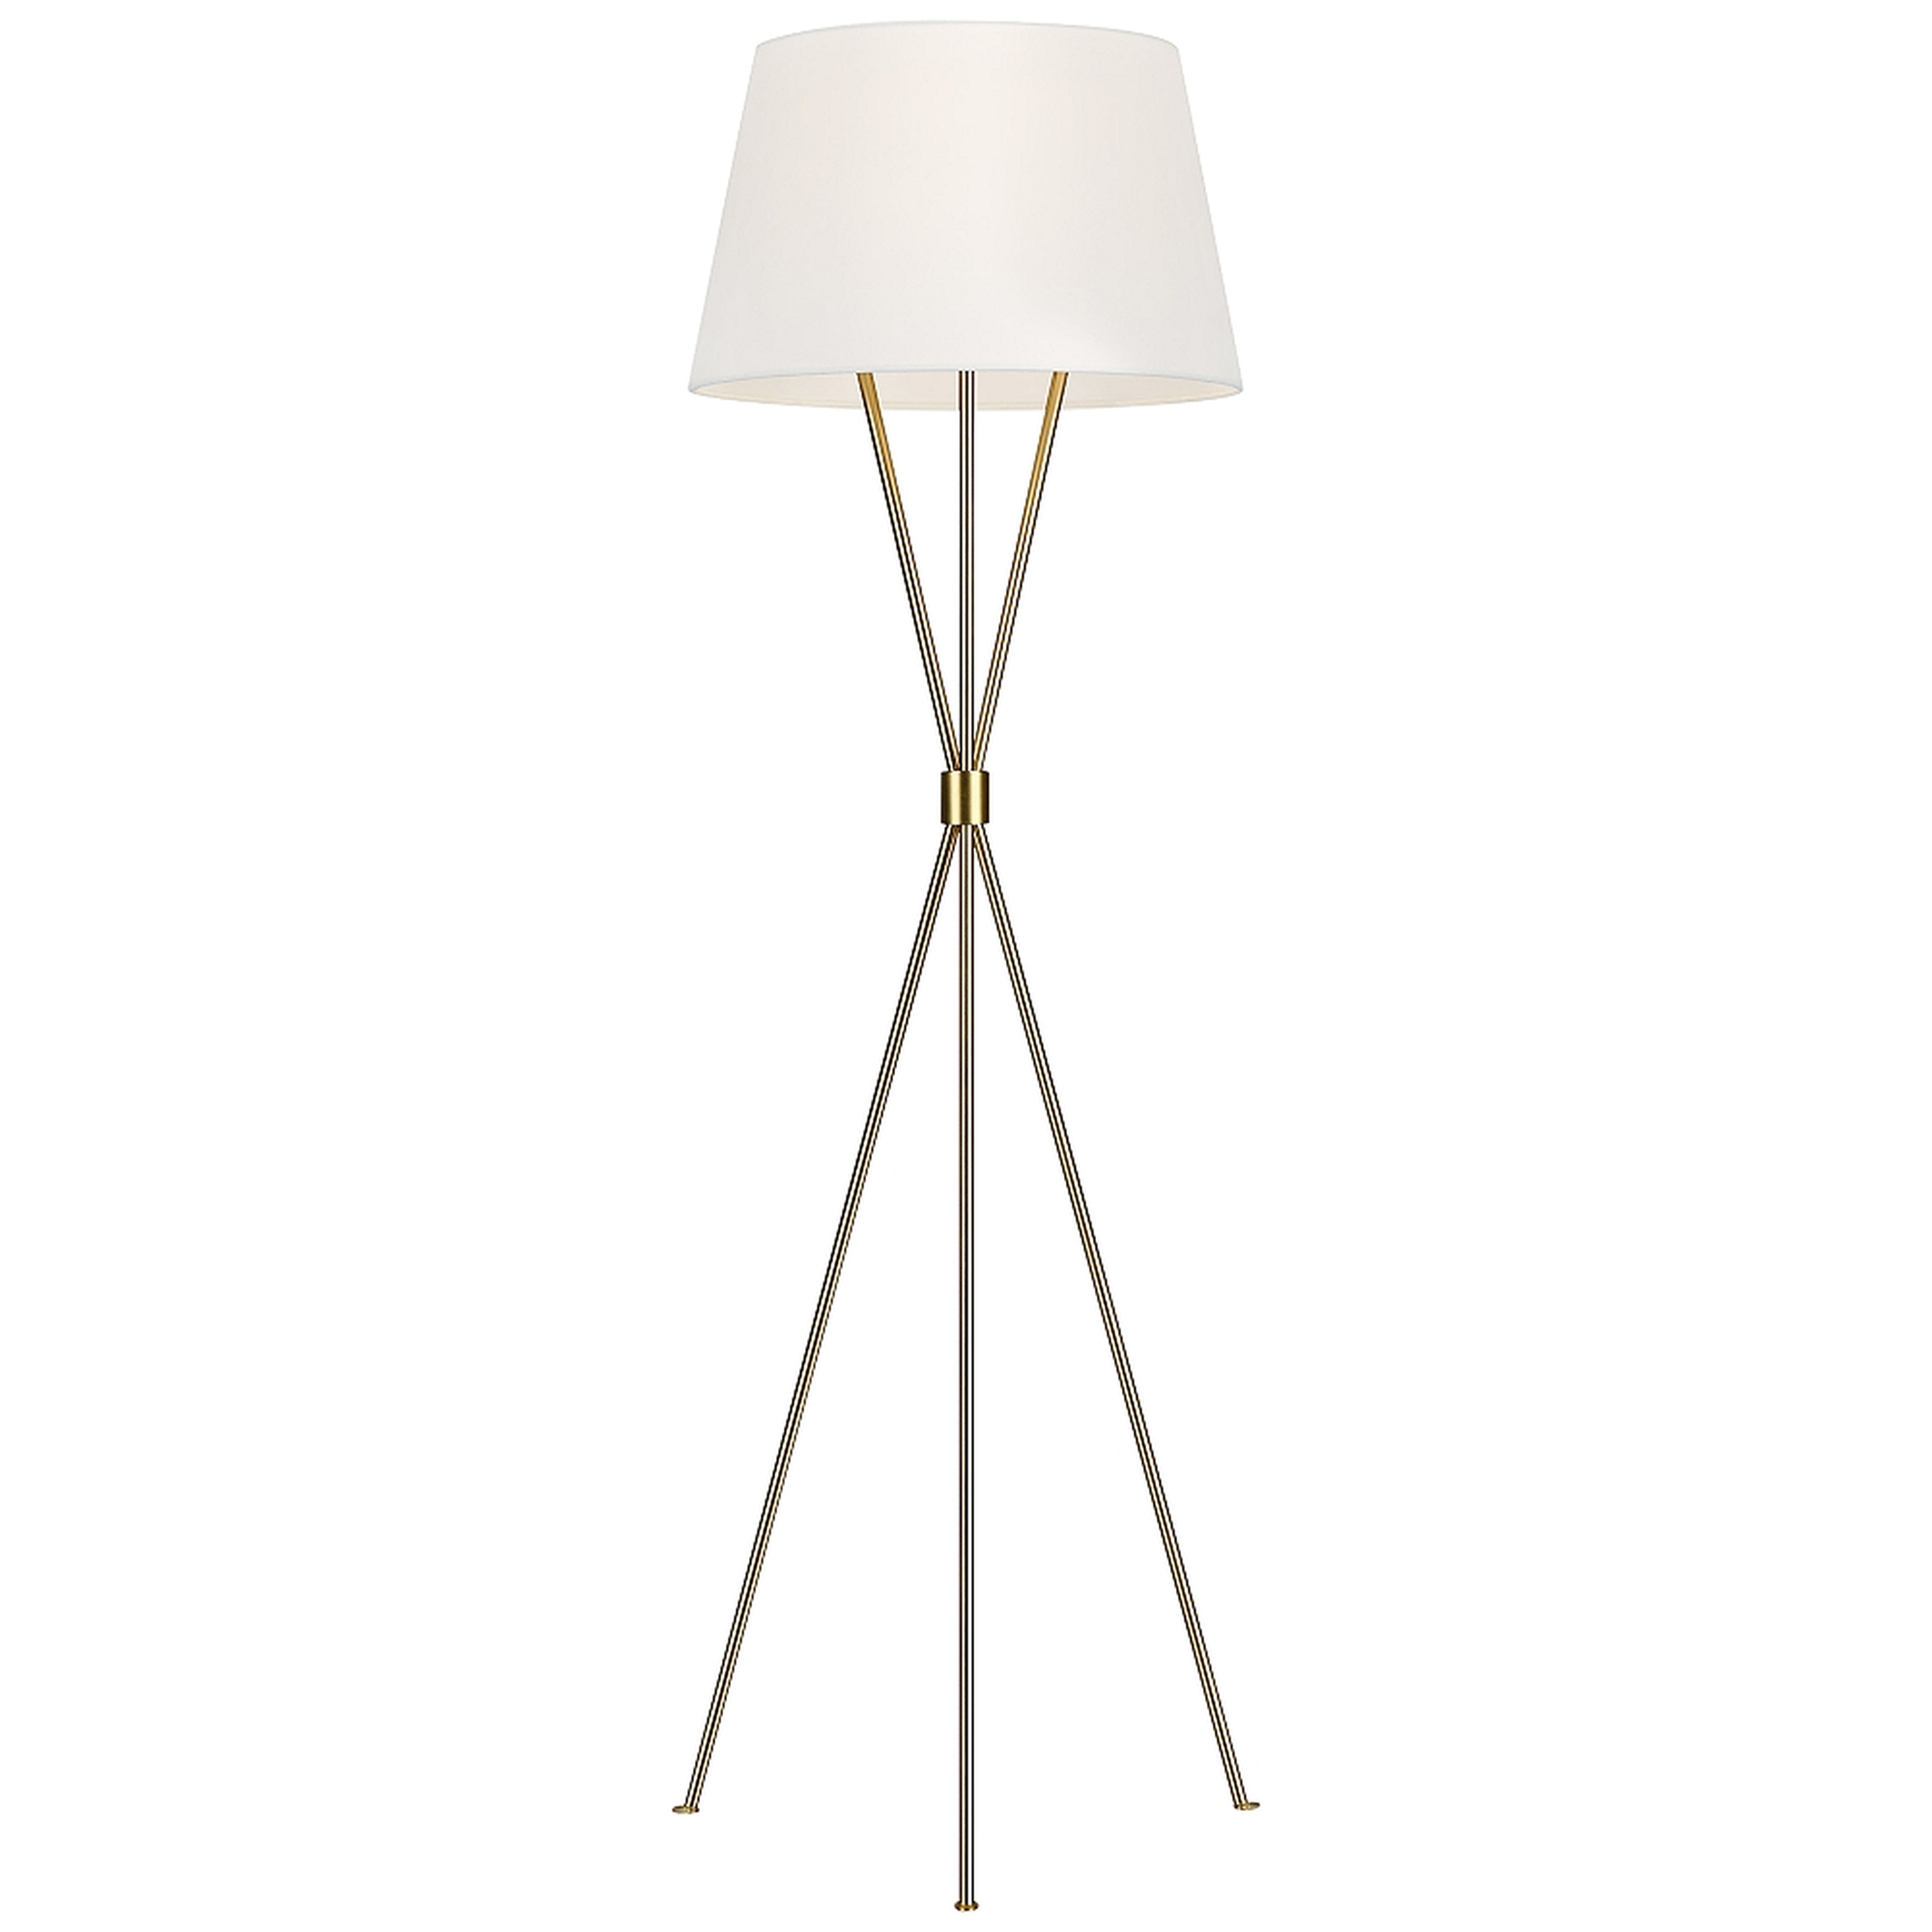 Penny Burnished Brass LED Floor Lamp - Style # 97E86 - Lamps Plus